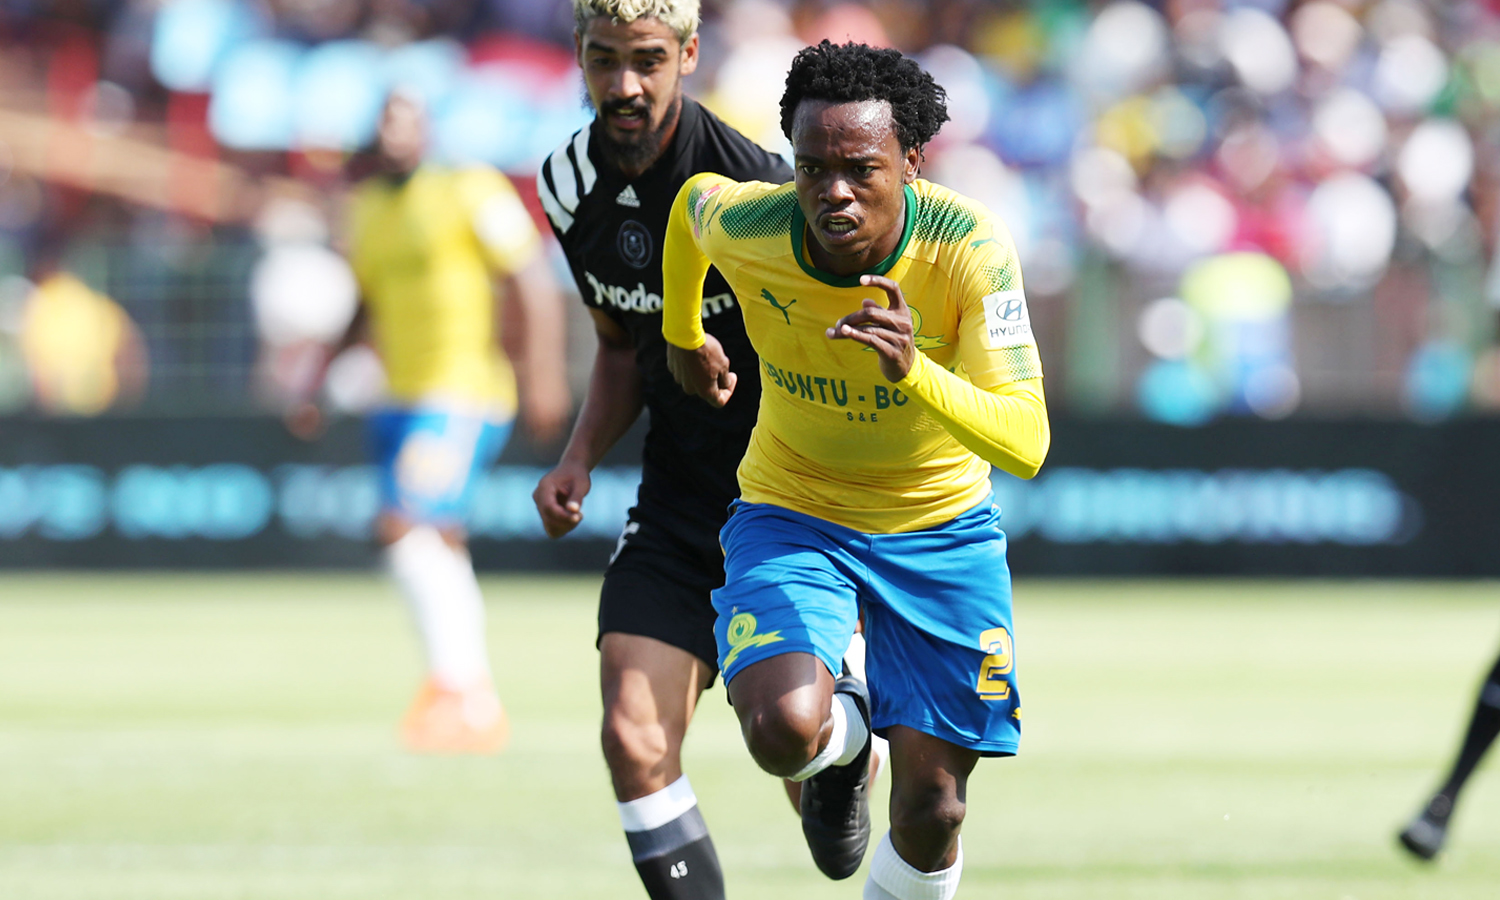 Mamelodi Sundowns attacking midfielder Percy Tau has been named as the Player of the Month for December following his sterling performance.